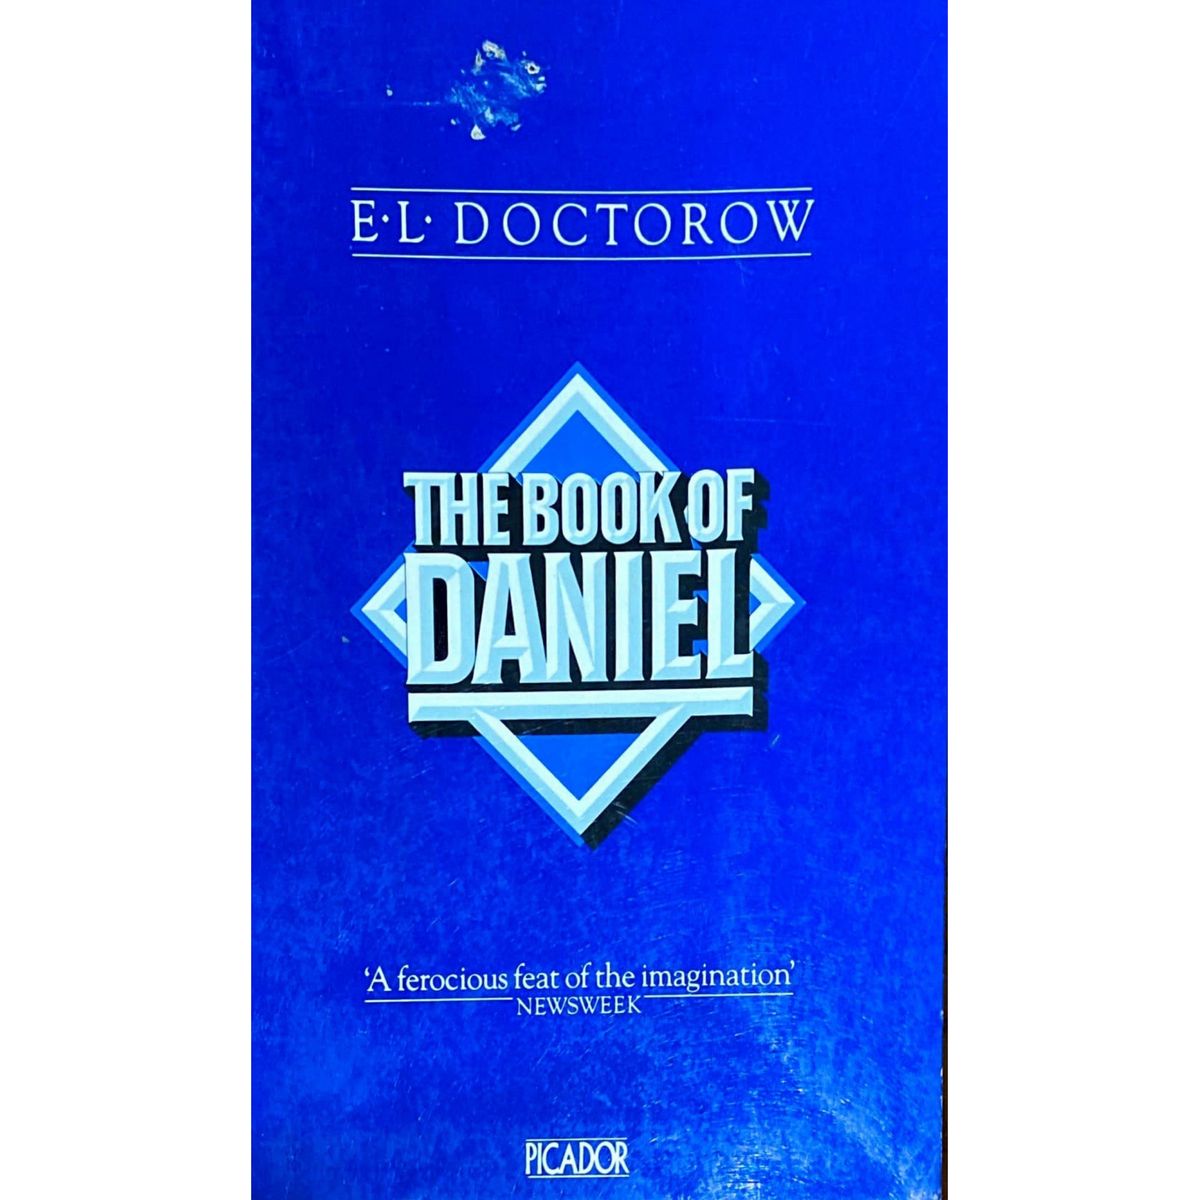 ISBN: 9780330269599 / 0330269593 - The Book of Daniel by E.L. Doctorow [1982]